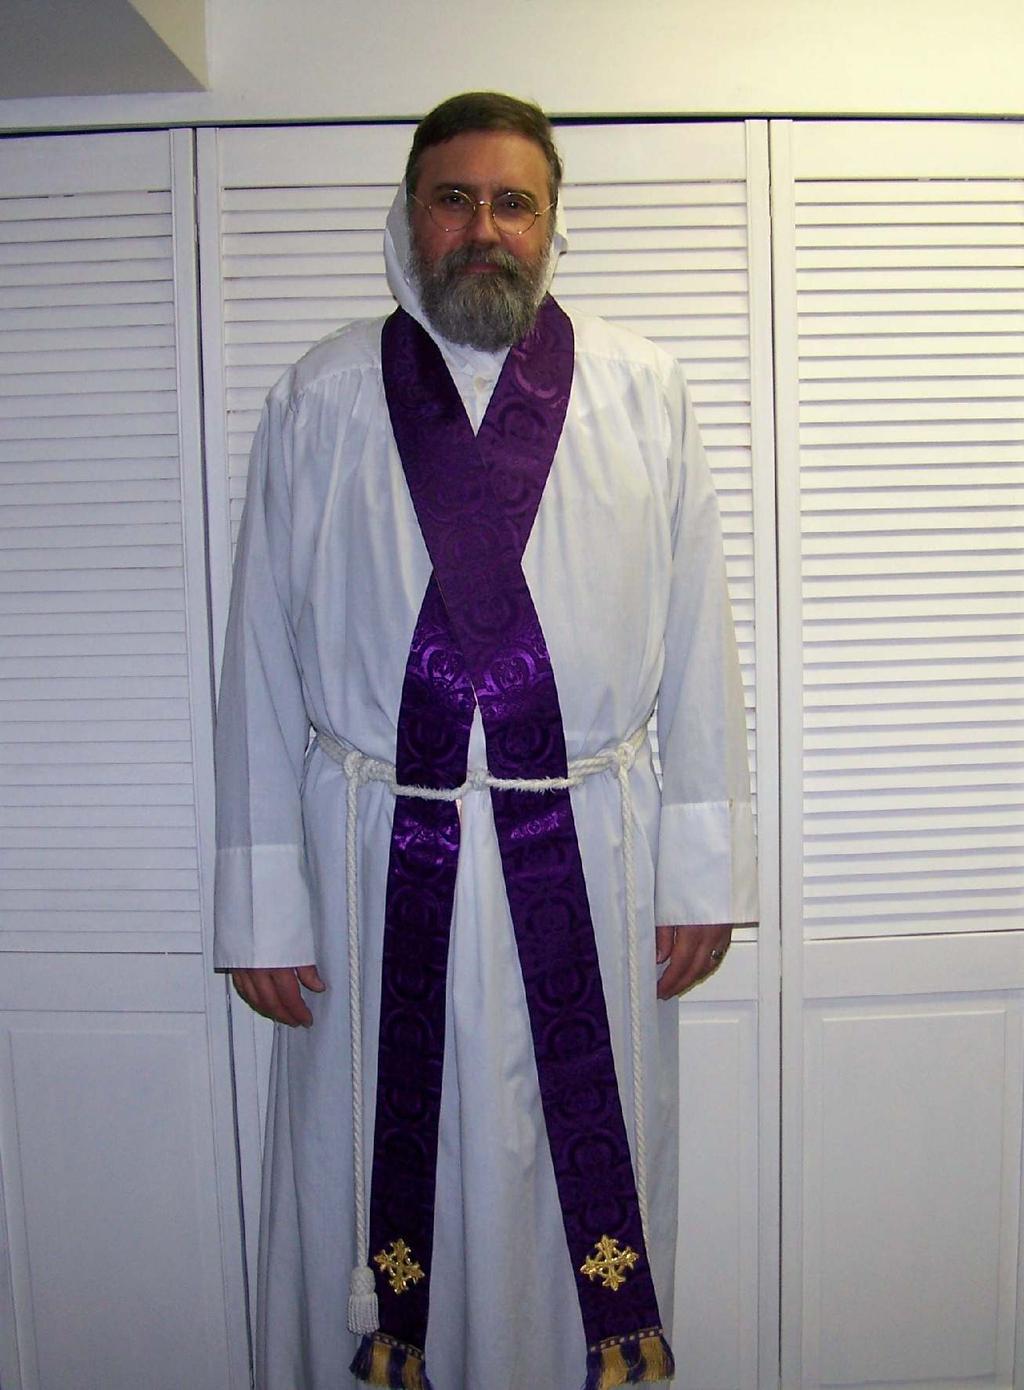 This completes e basic underwear, worn by priests, deacons and subdeacons, and now we move on to e more elaborate vestments. The stole is put on next.